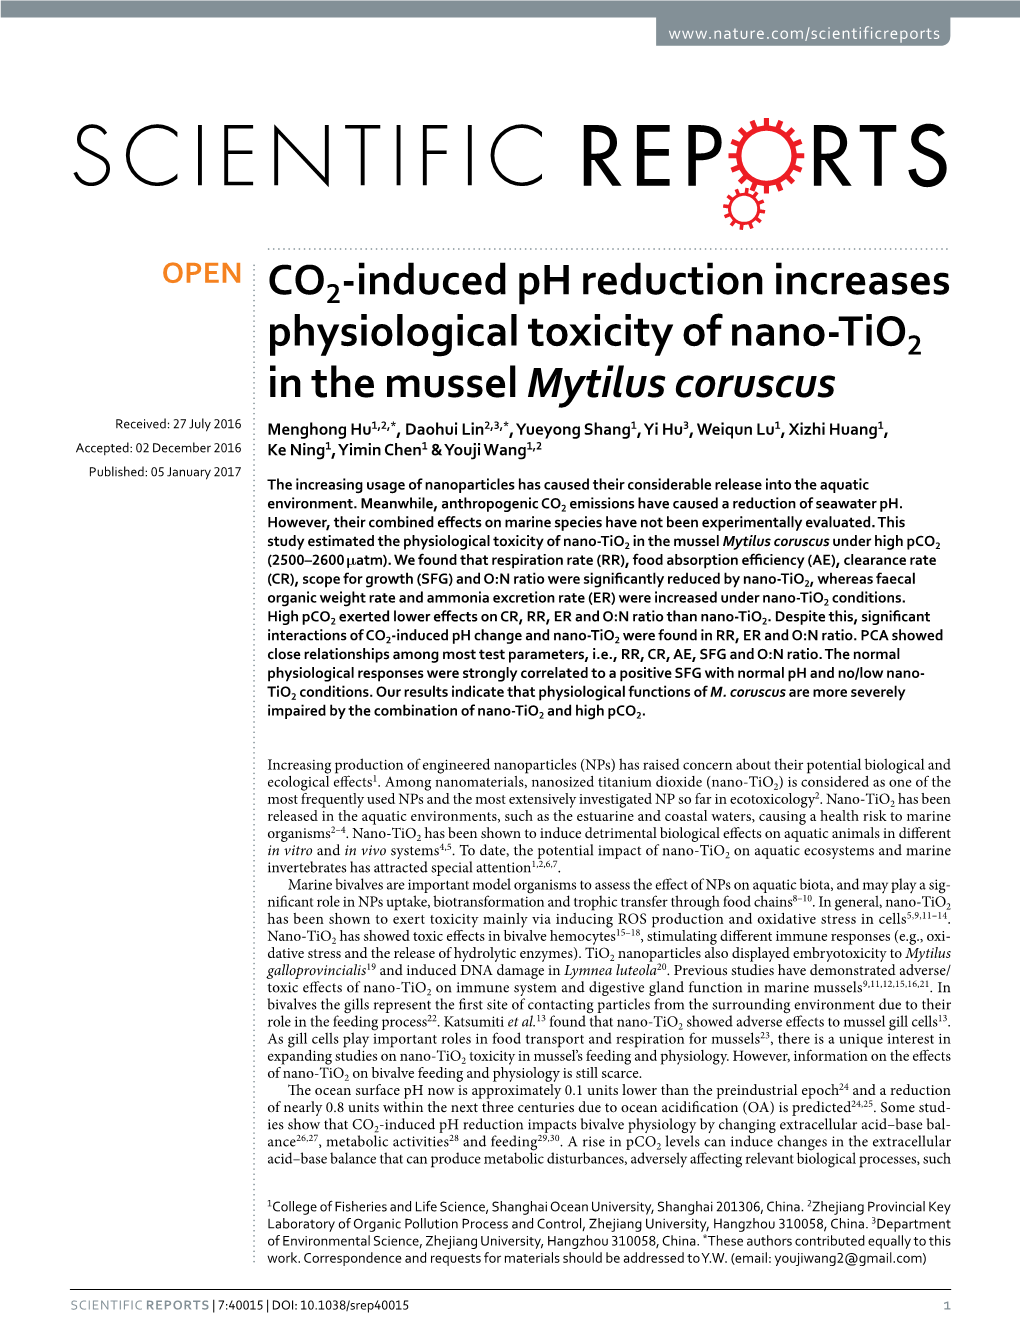 CO2-Induced Ph Reduction Increases Physiological Toxicity of Nano-Tio2